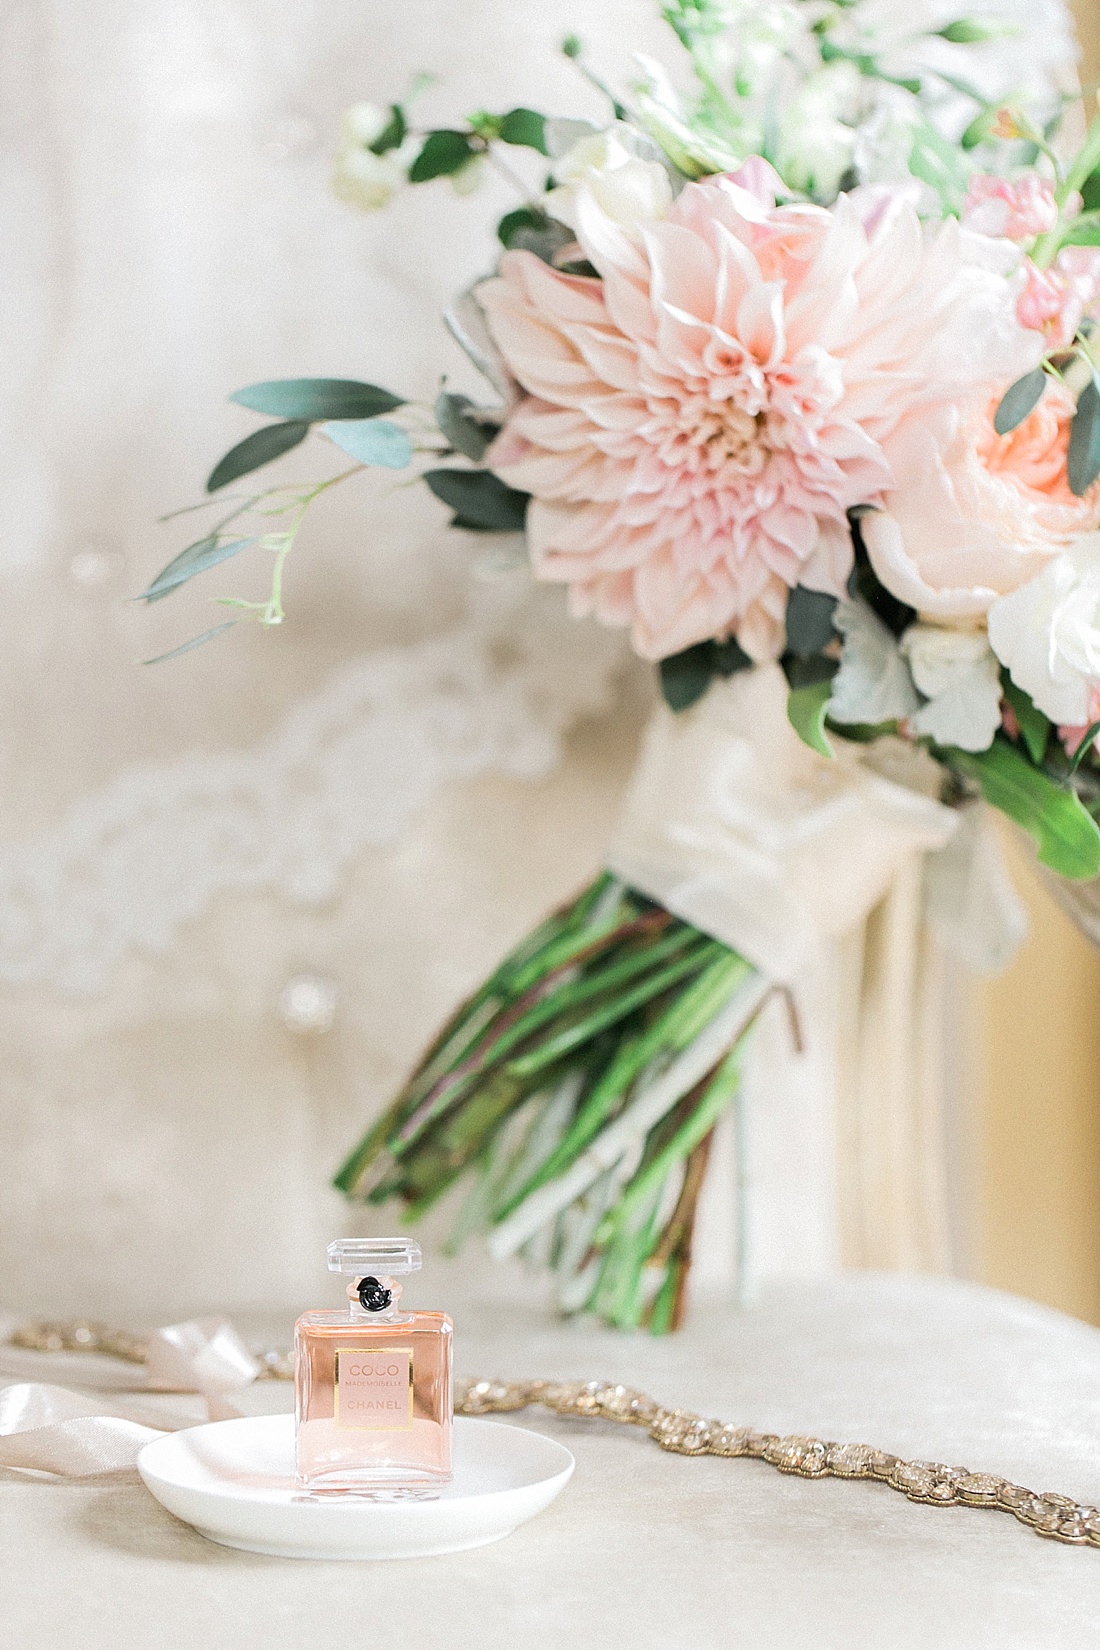 Wedding day perfume- Coco Mademoiselle by Chanel | Abby Grace